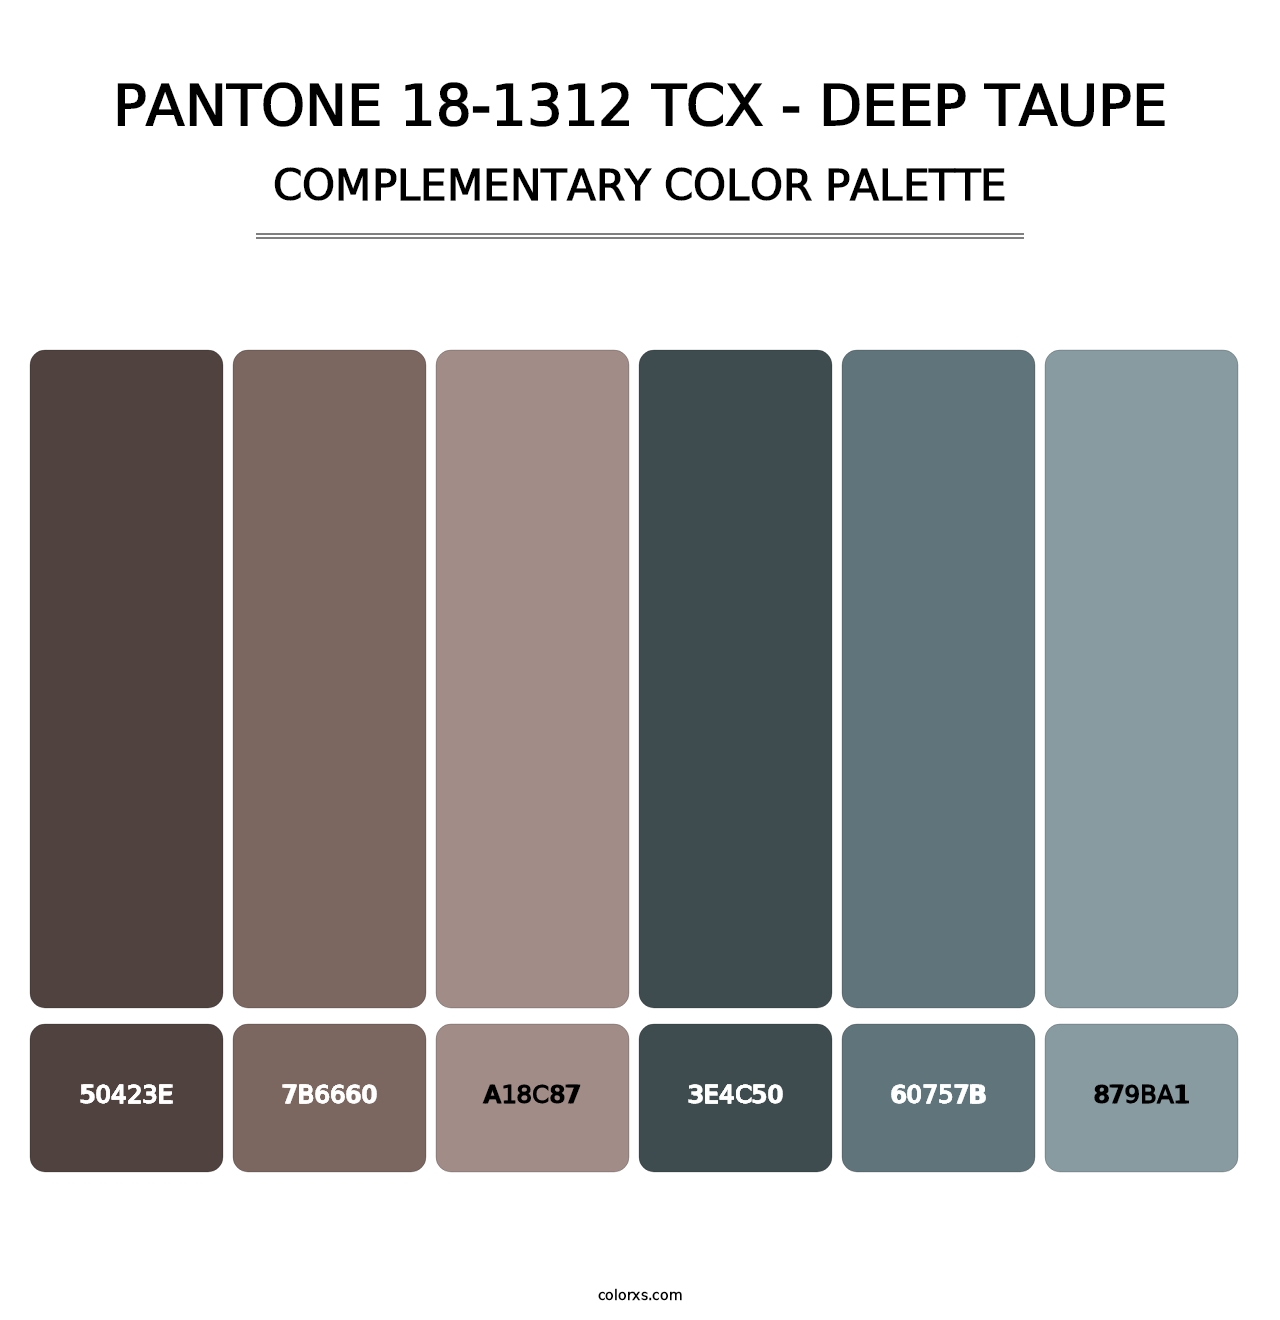 PANTONE 18-1312 TCX - Deep Taupe - Complementary Color Palette